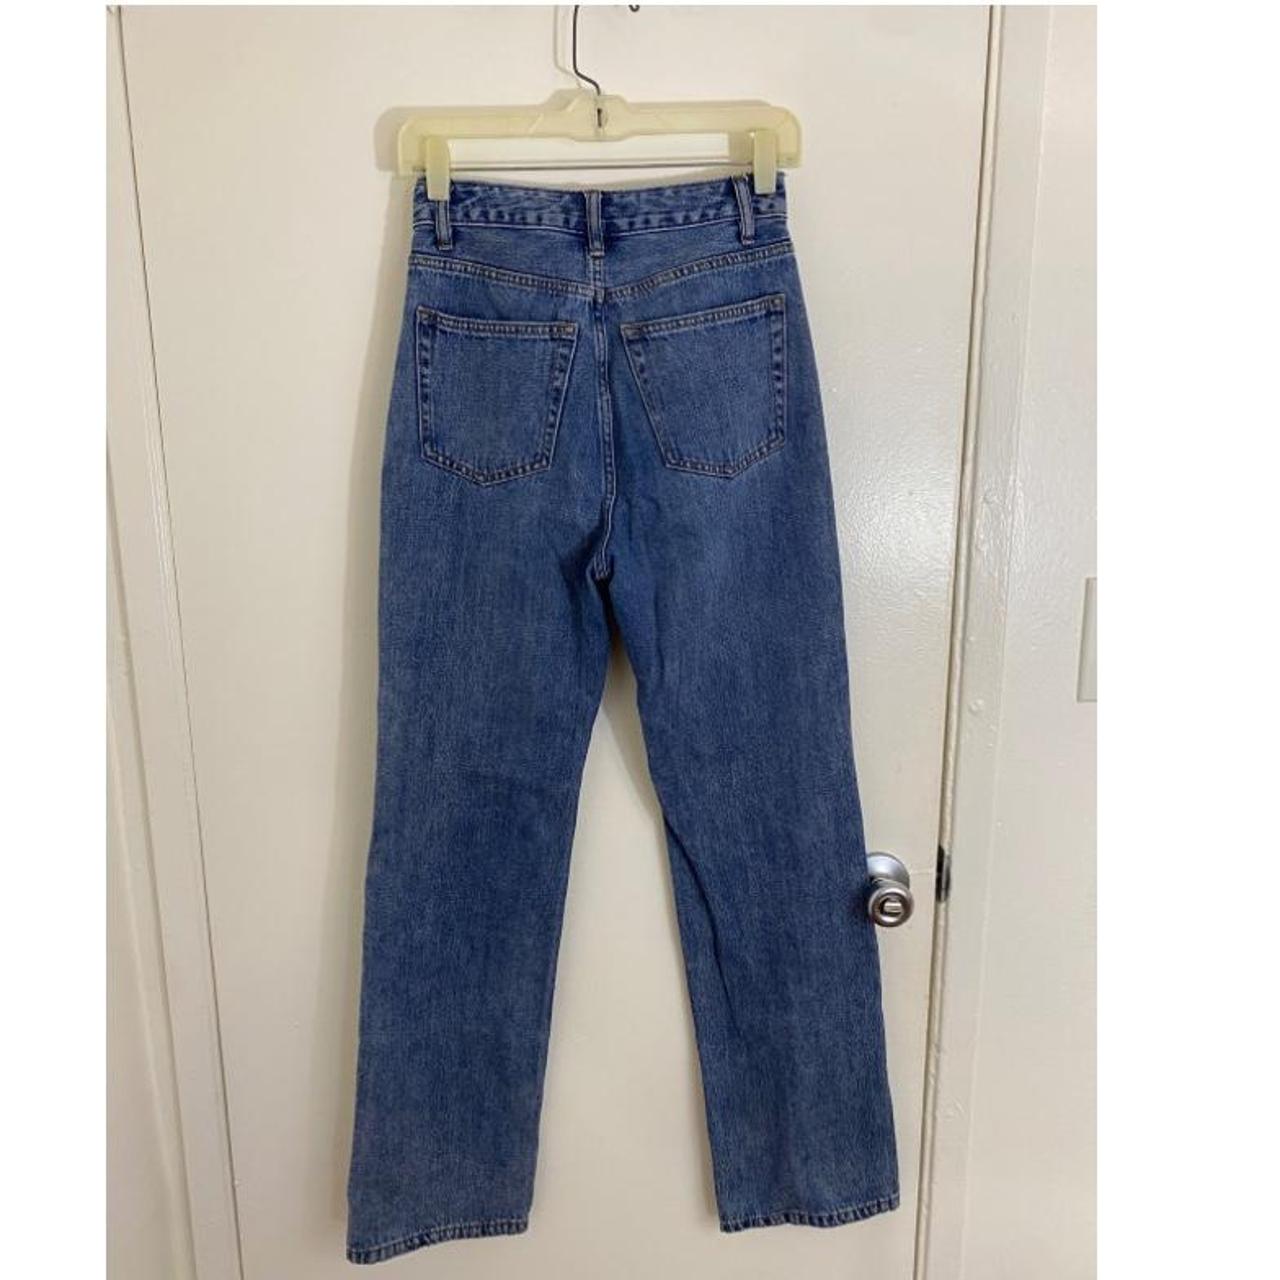 House of CB “Yara” jeans in XS. These remind me of... - Depop